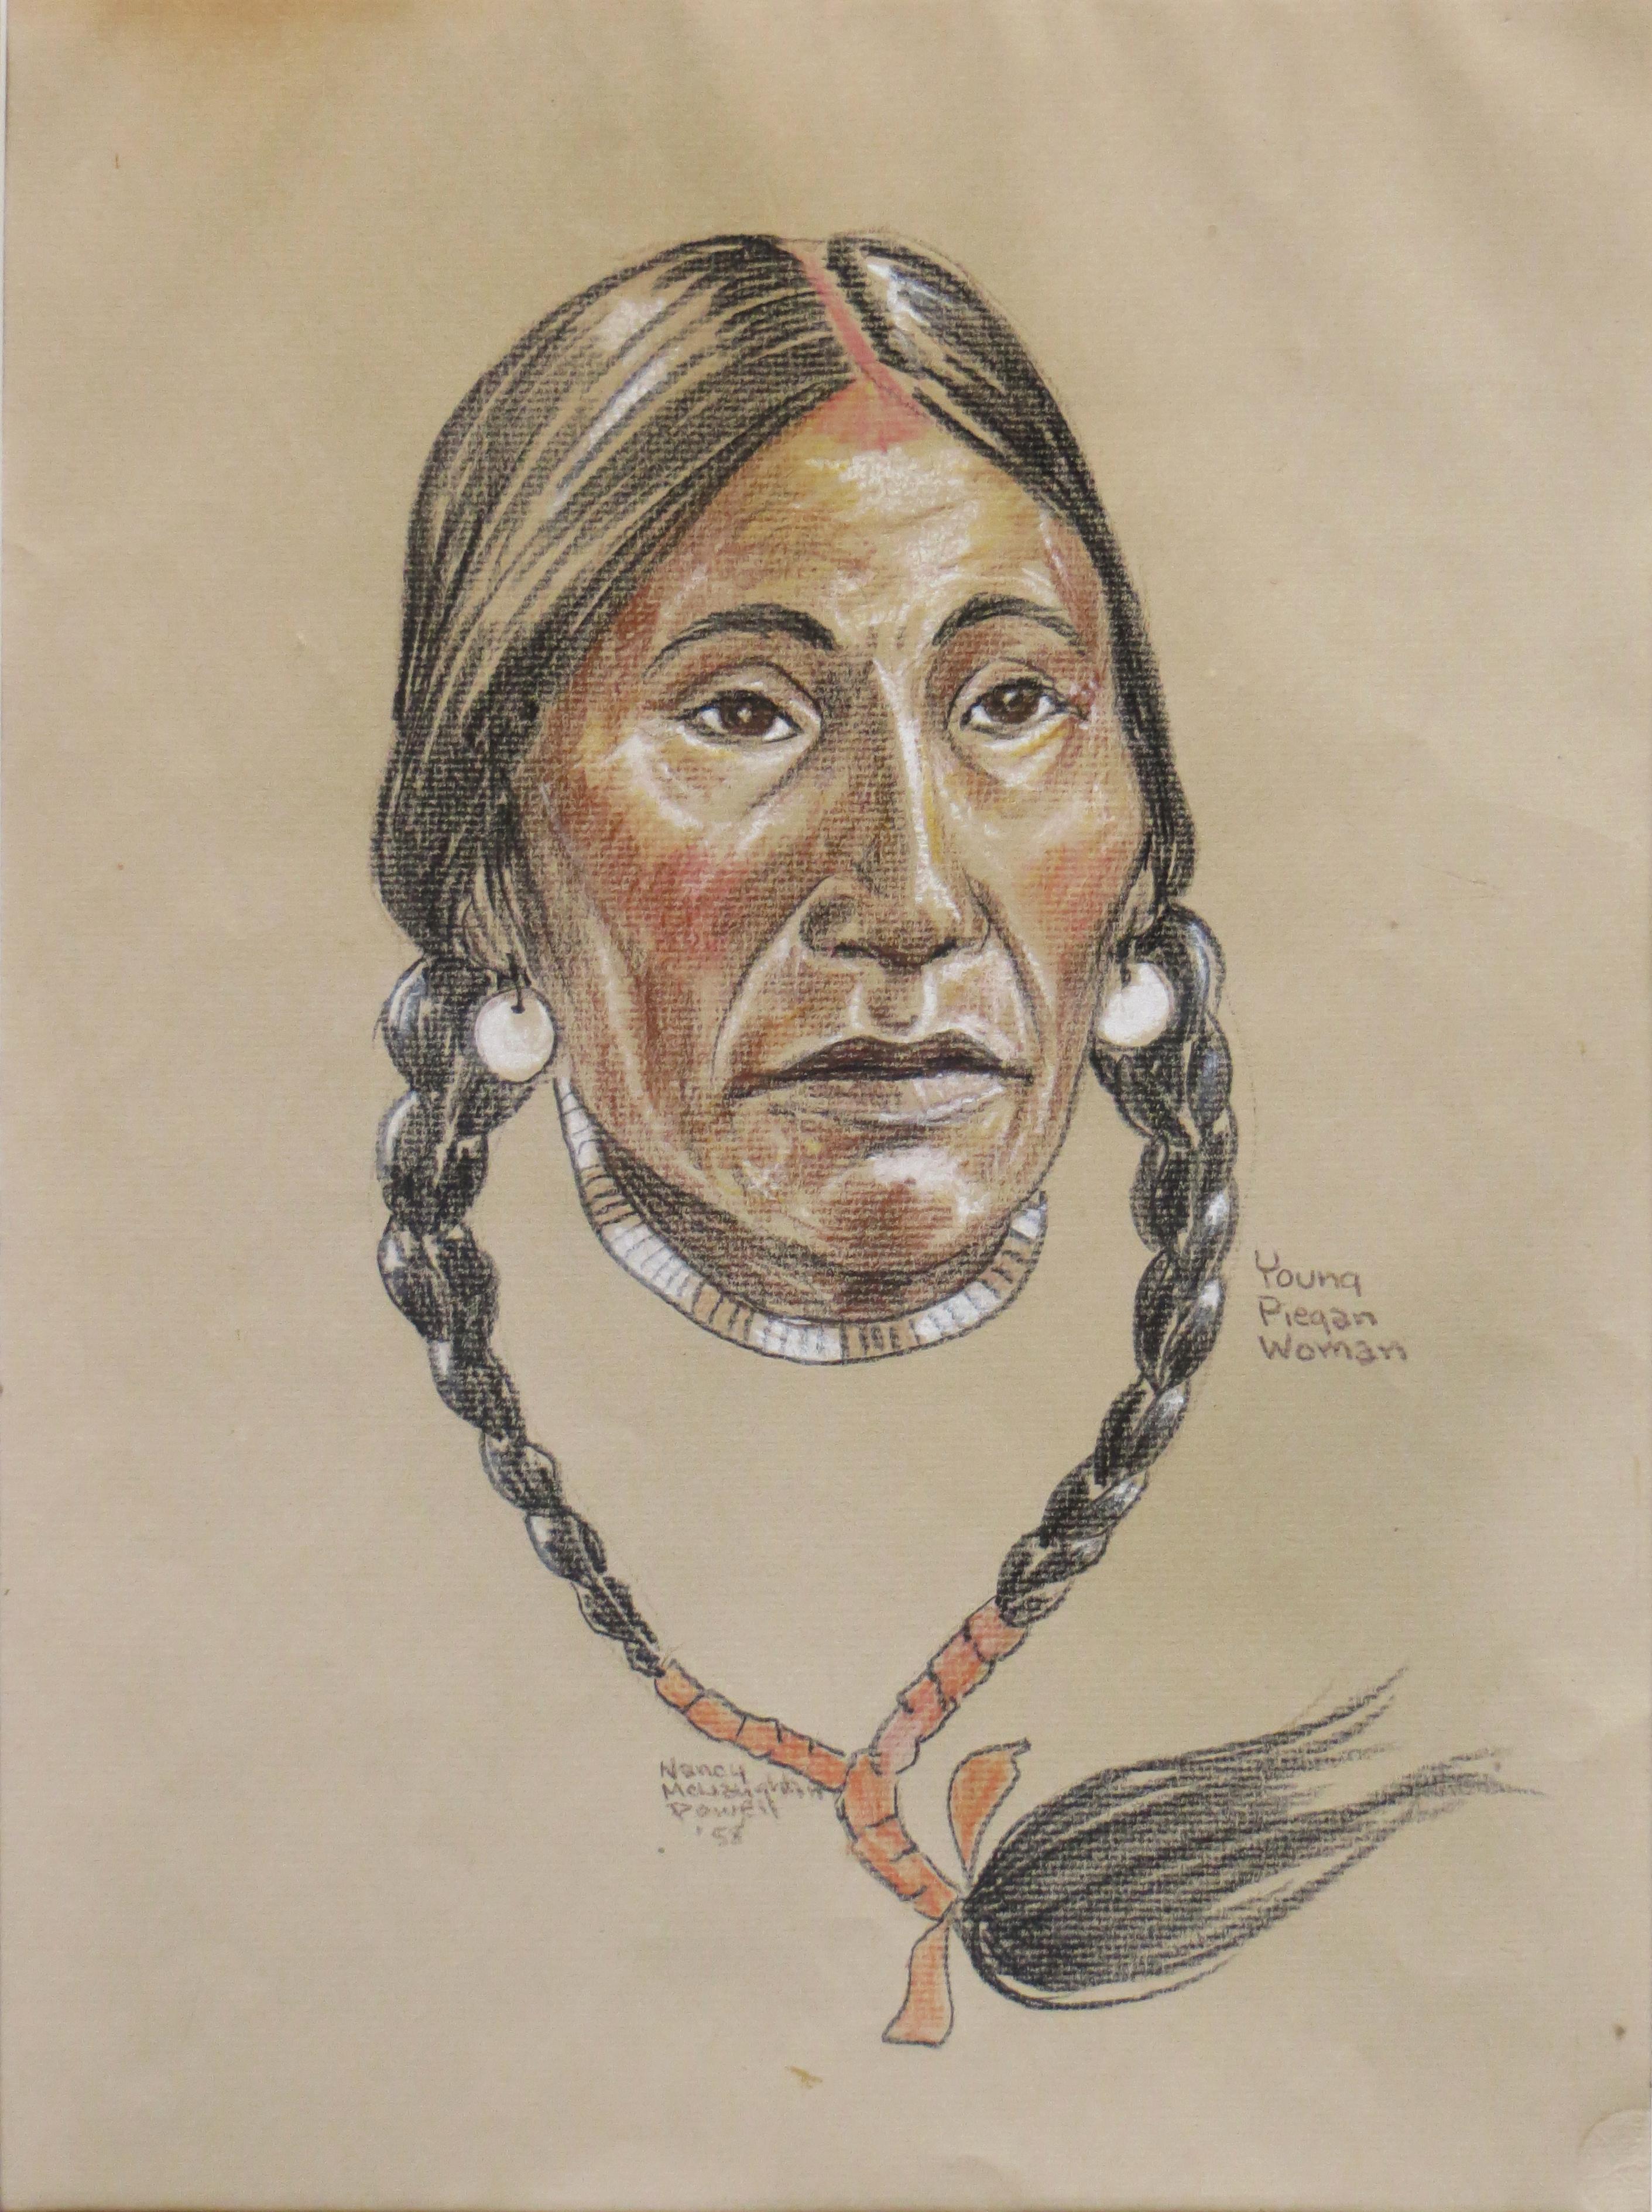 Artist: Nancy Mclaughlin Powell – American (1932-1985)
Title: Young Piegan Woman
Year: 1958
Medium: Pastel on paper
Sight size: 15.5 x 11.5 inches within the mat 
Framed size: 24 x 20 inches 
Signature: Signed, dated lower left
Condition: Good